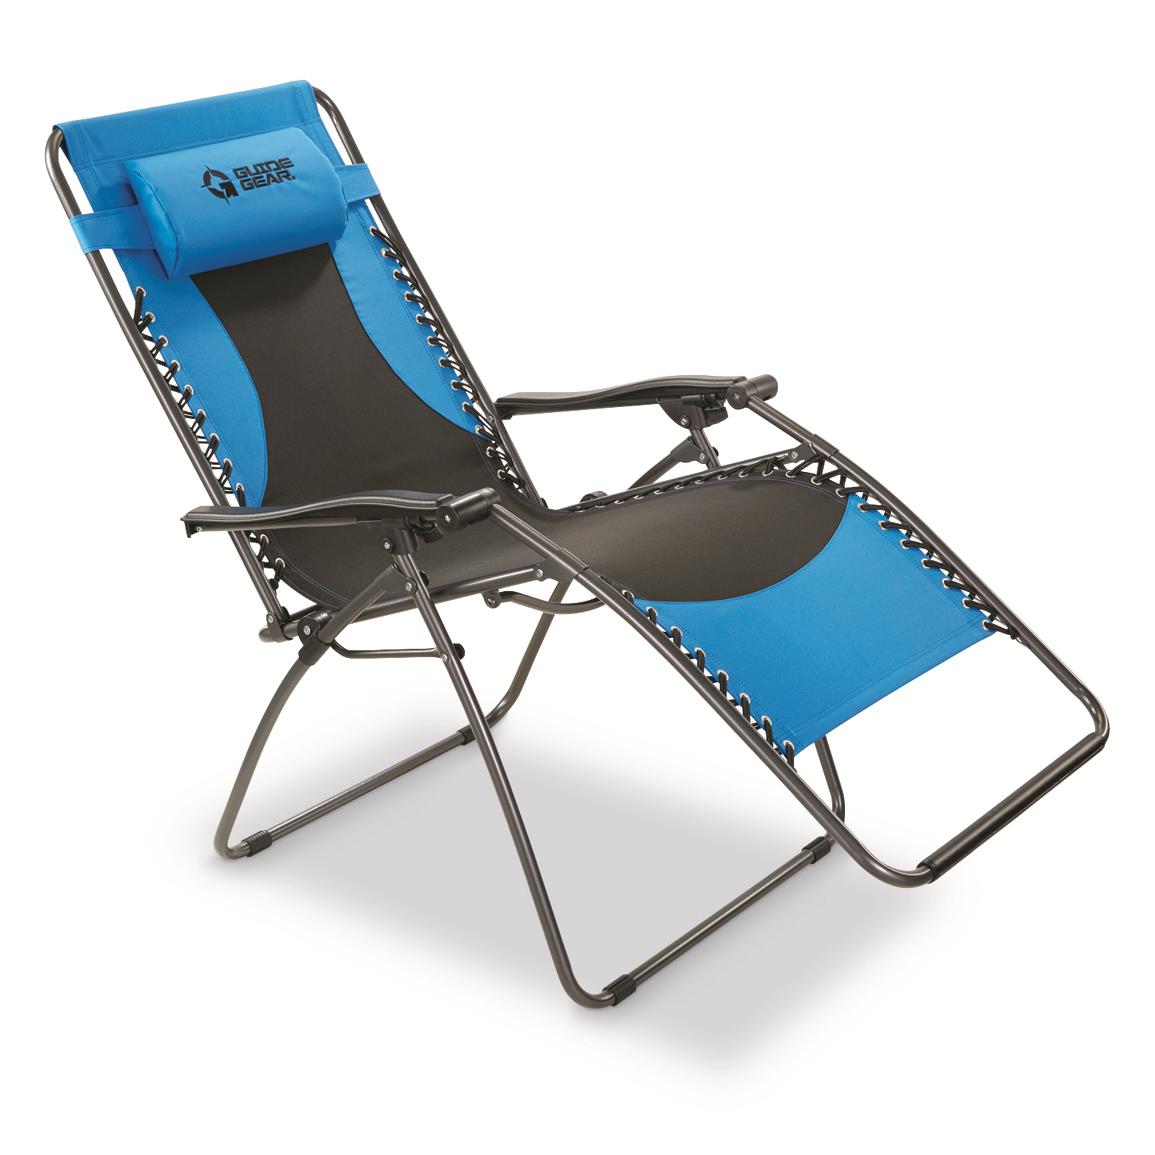 Guide Gear Oversized 500 lb. Zero Gravity Chair, Blue - 677555, Camping